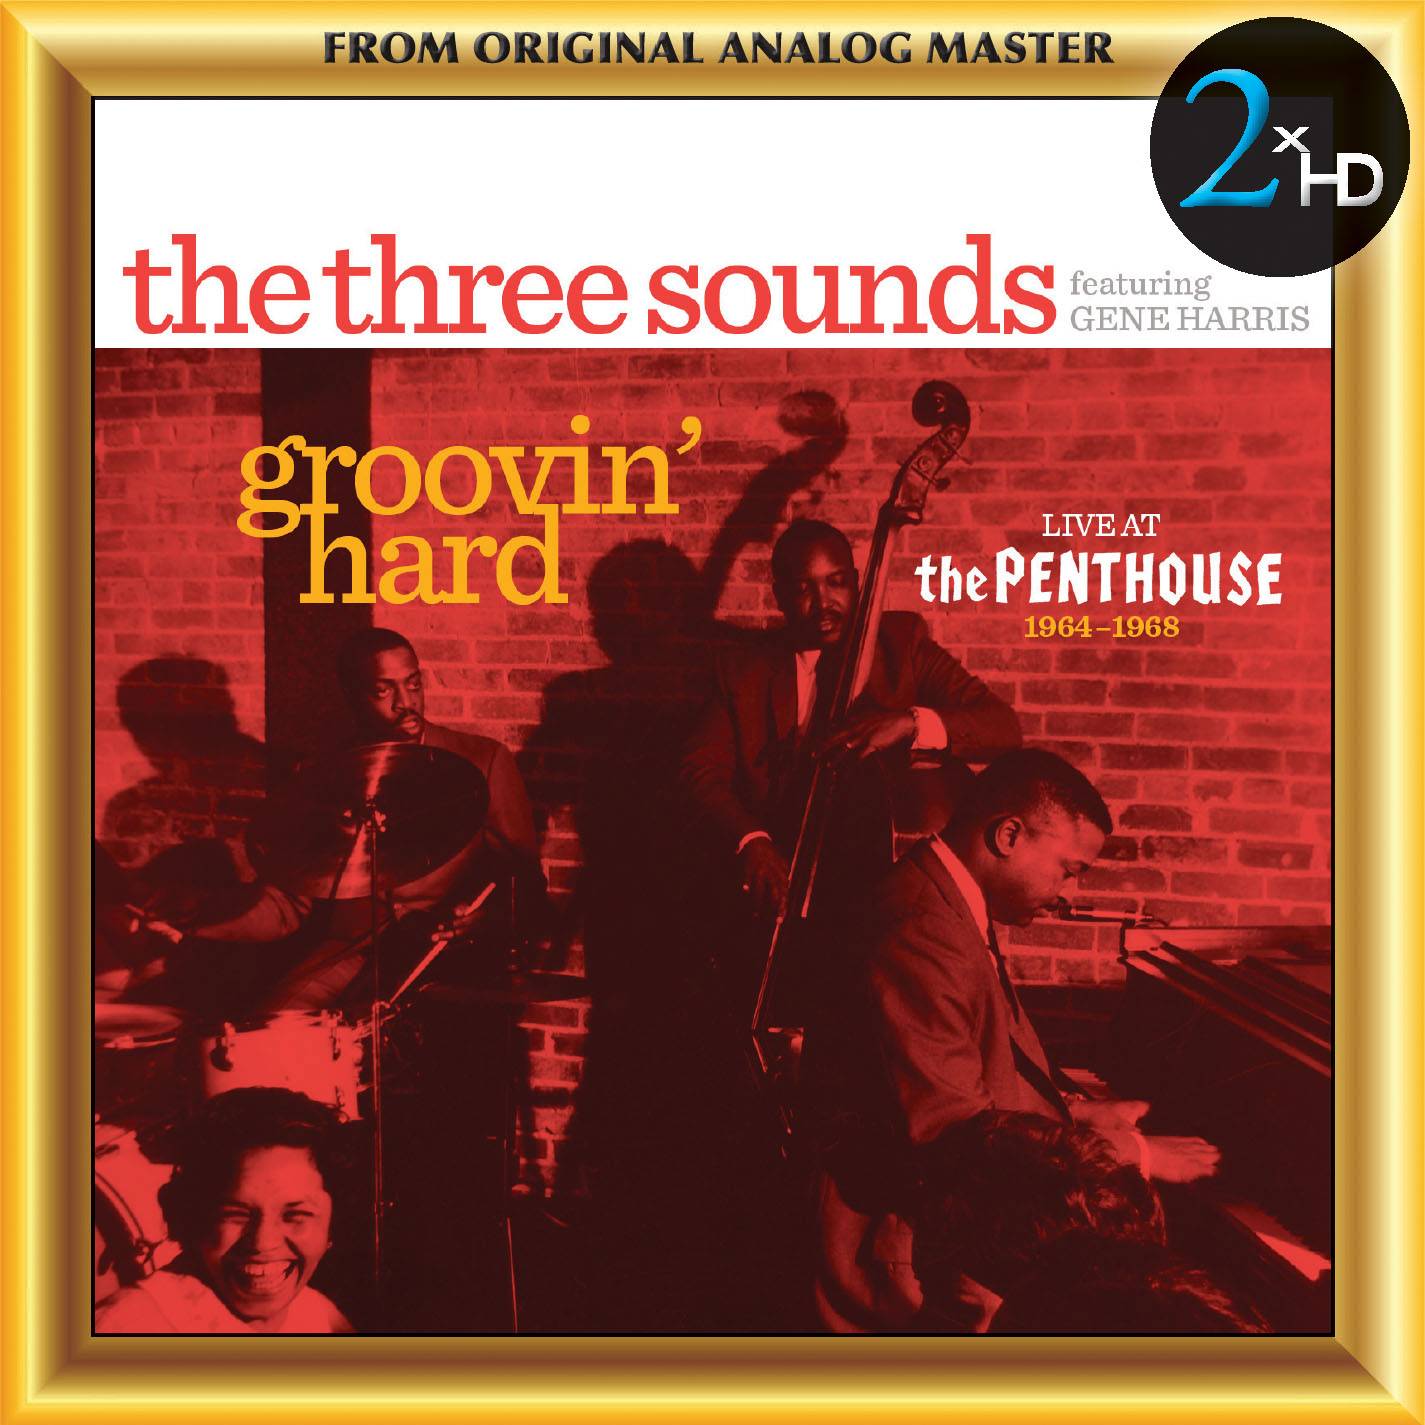 The Three Sounds - Groovin’ Hard: Live At The Penthouse 1964-1968 (2017) [AcousticSounds DSF DSD128/5.64MHz + FLAC 24bit/88,2kHz]